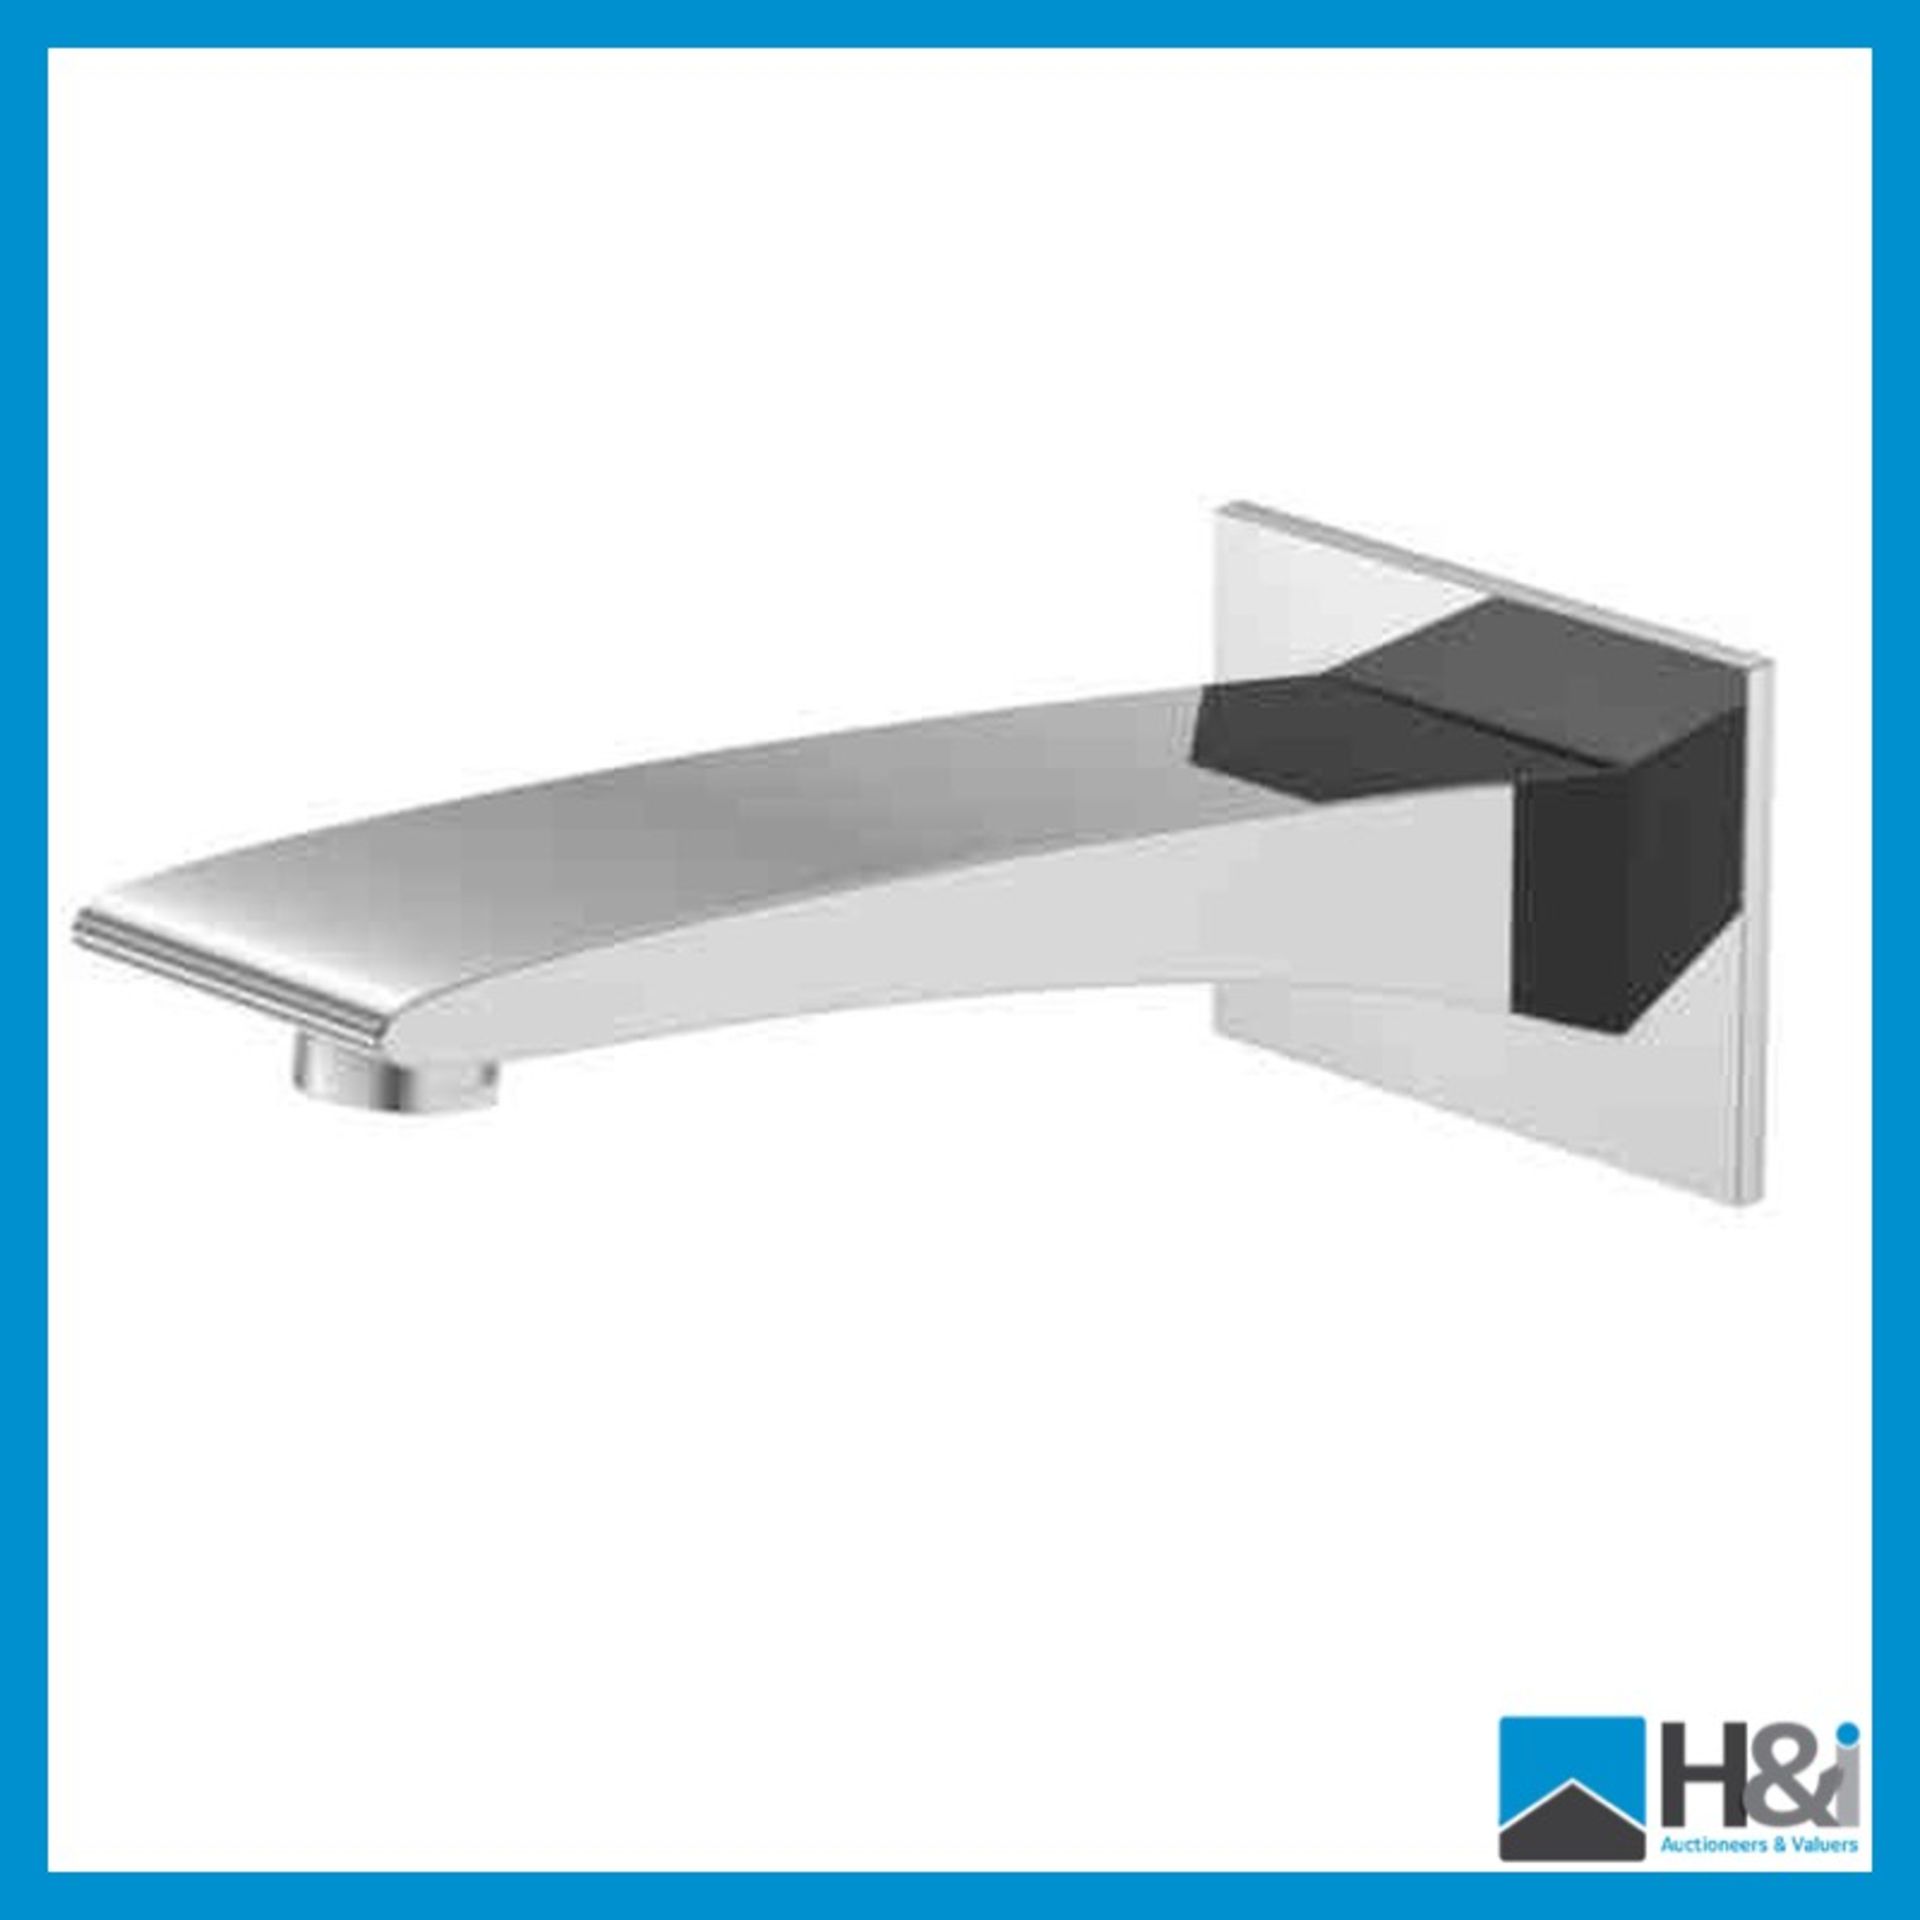 Steinberg Polished Chrome Wall Mounted Spout for Basin or Bath. 180.2310. RRP £234.80 Brand New in